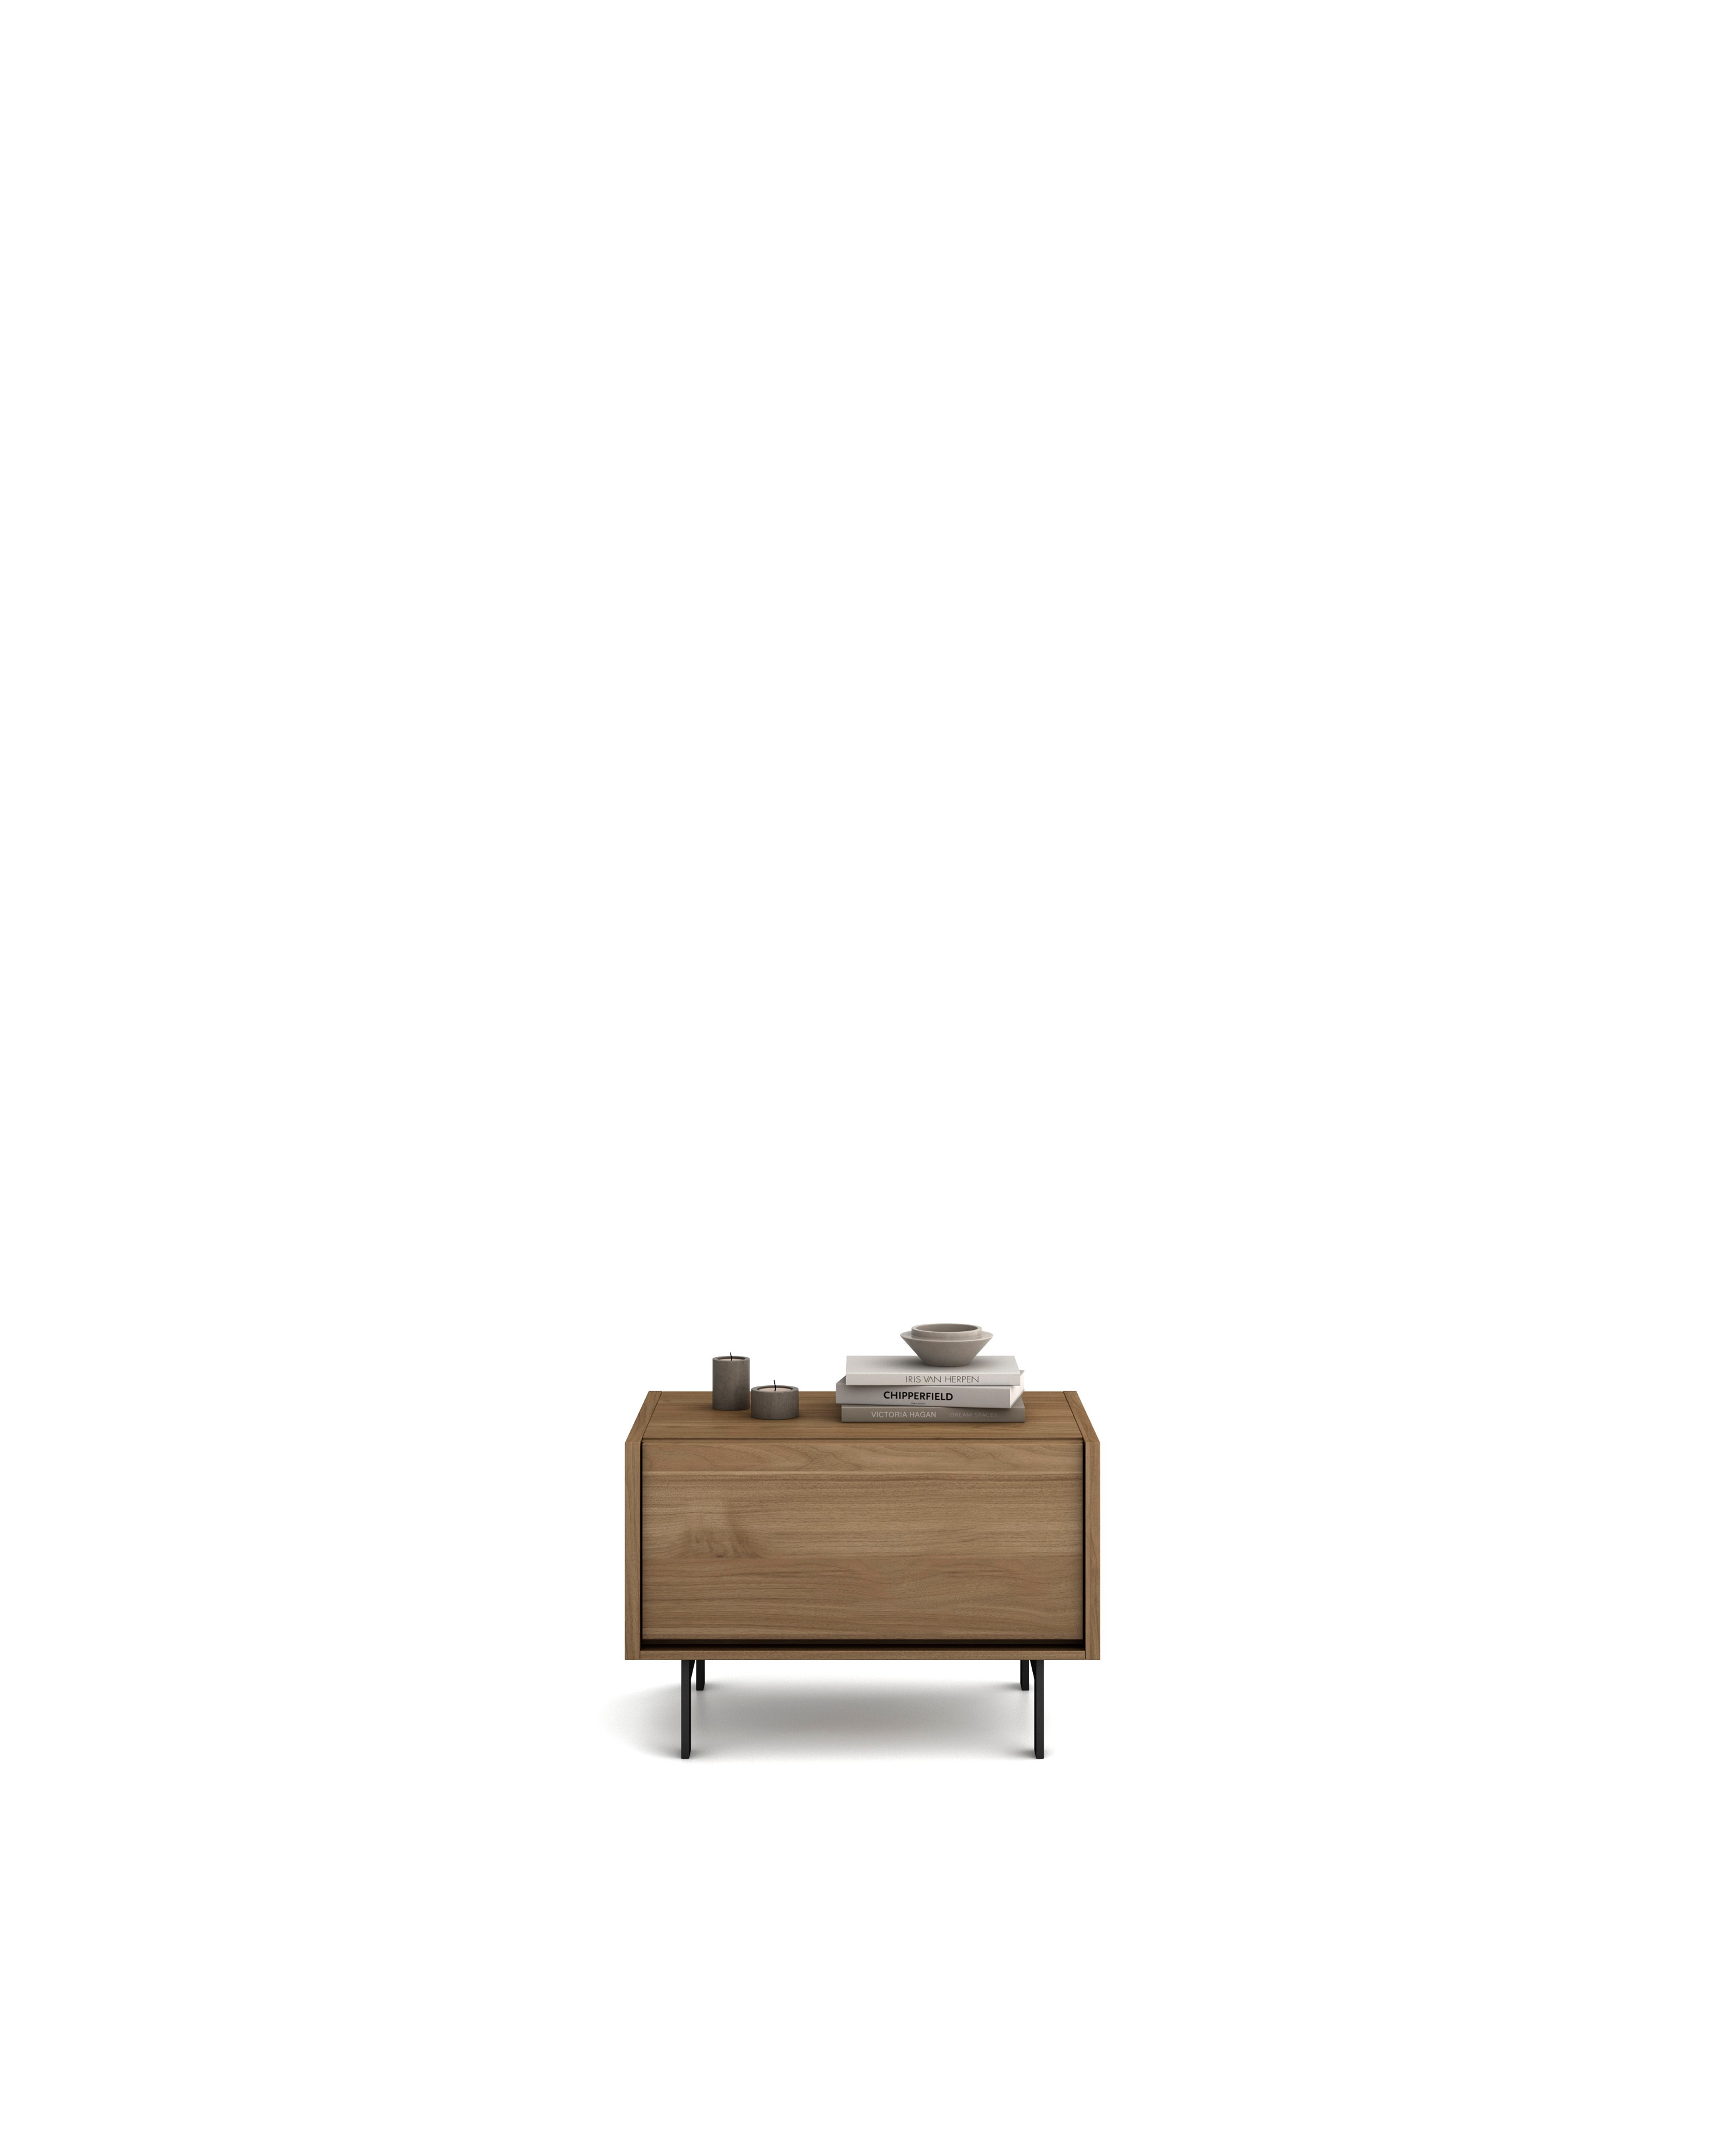 Nativ coffee table with 1 storage drawer.